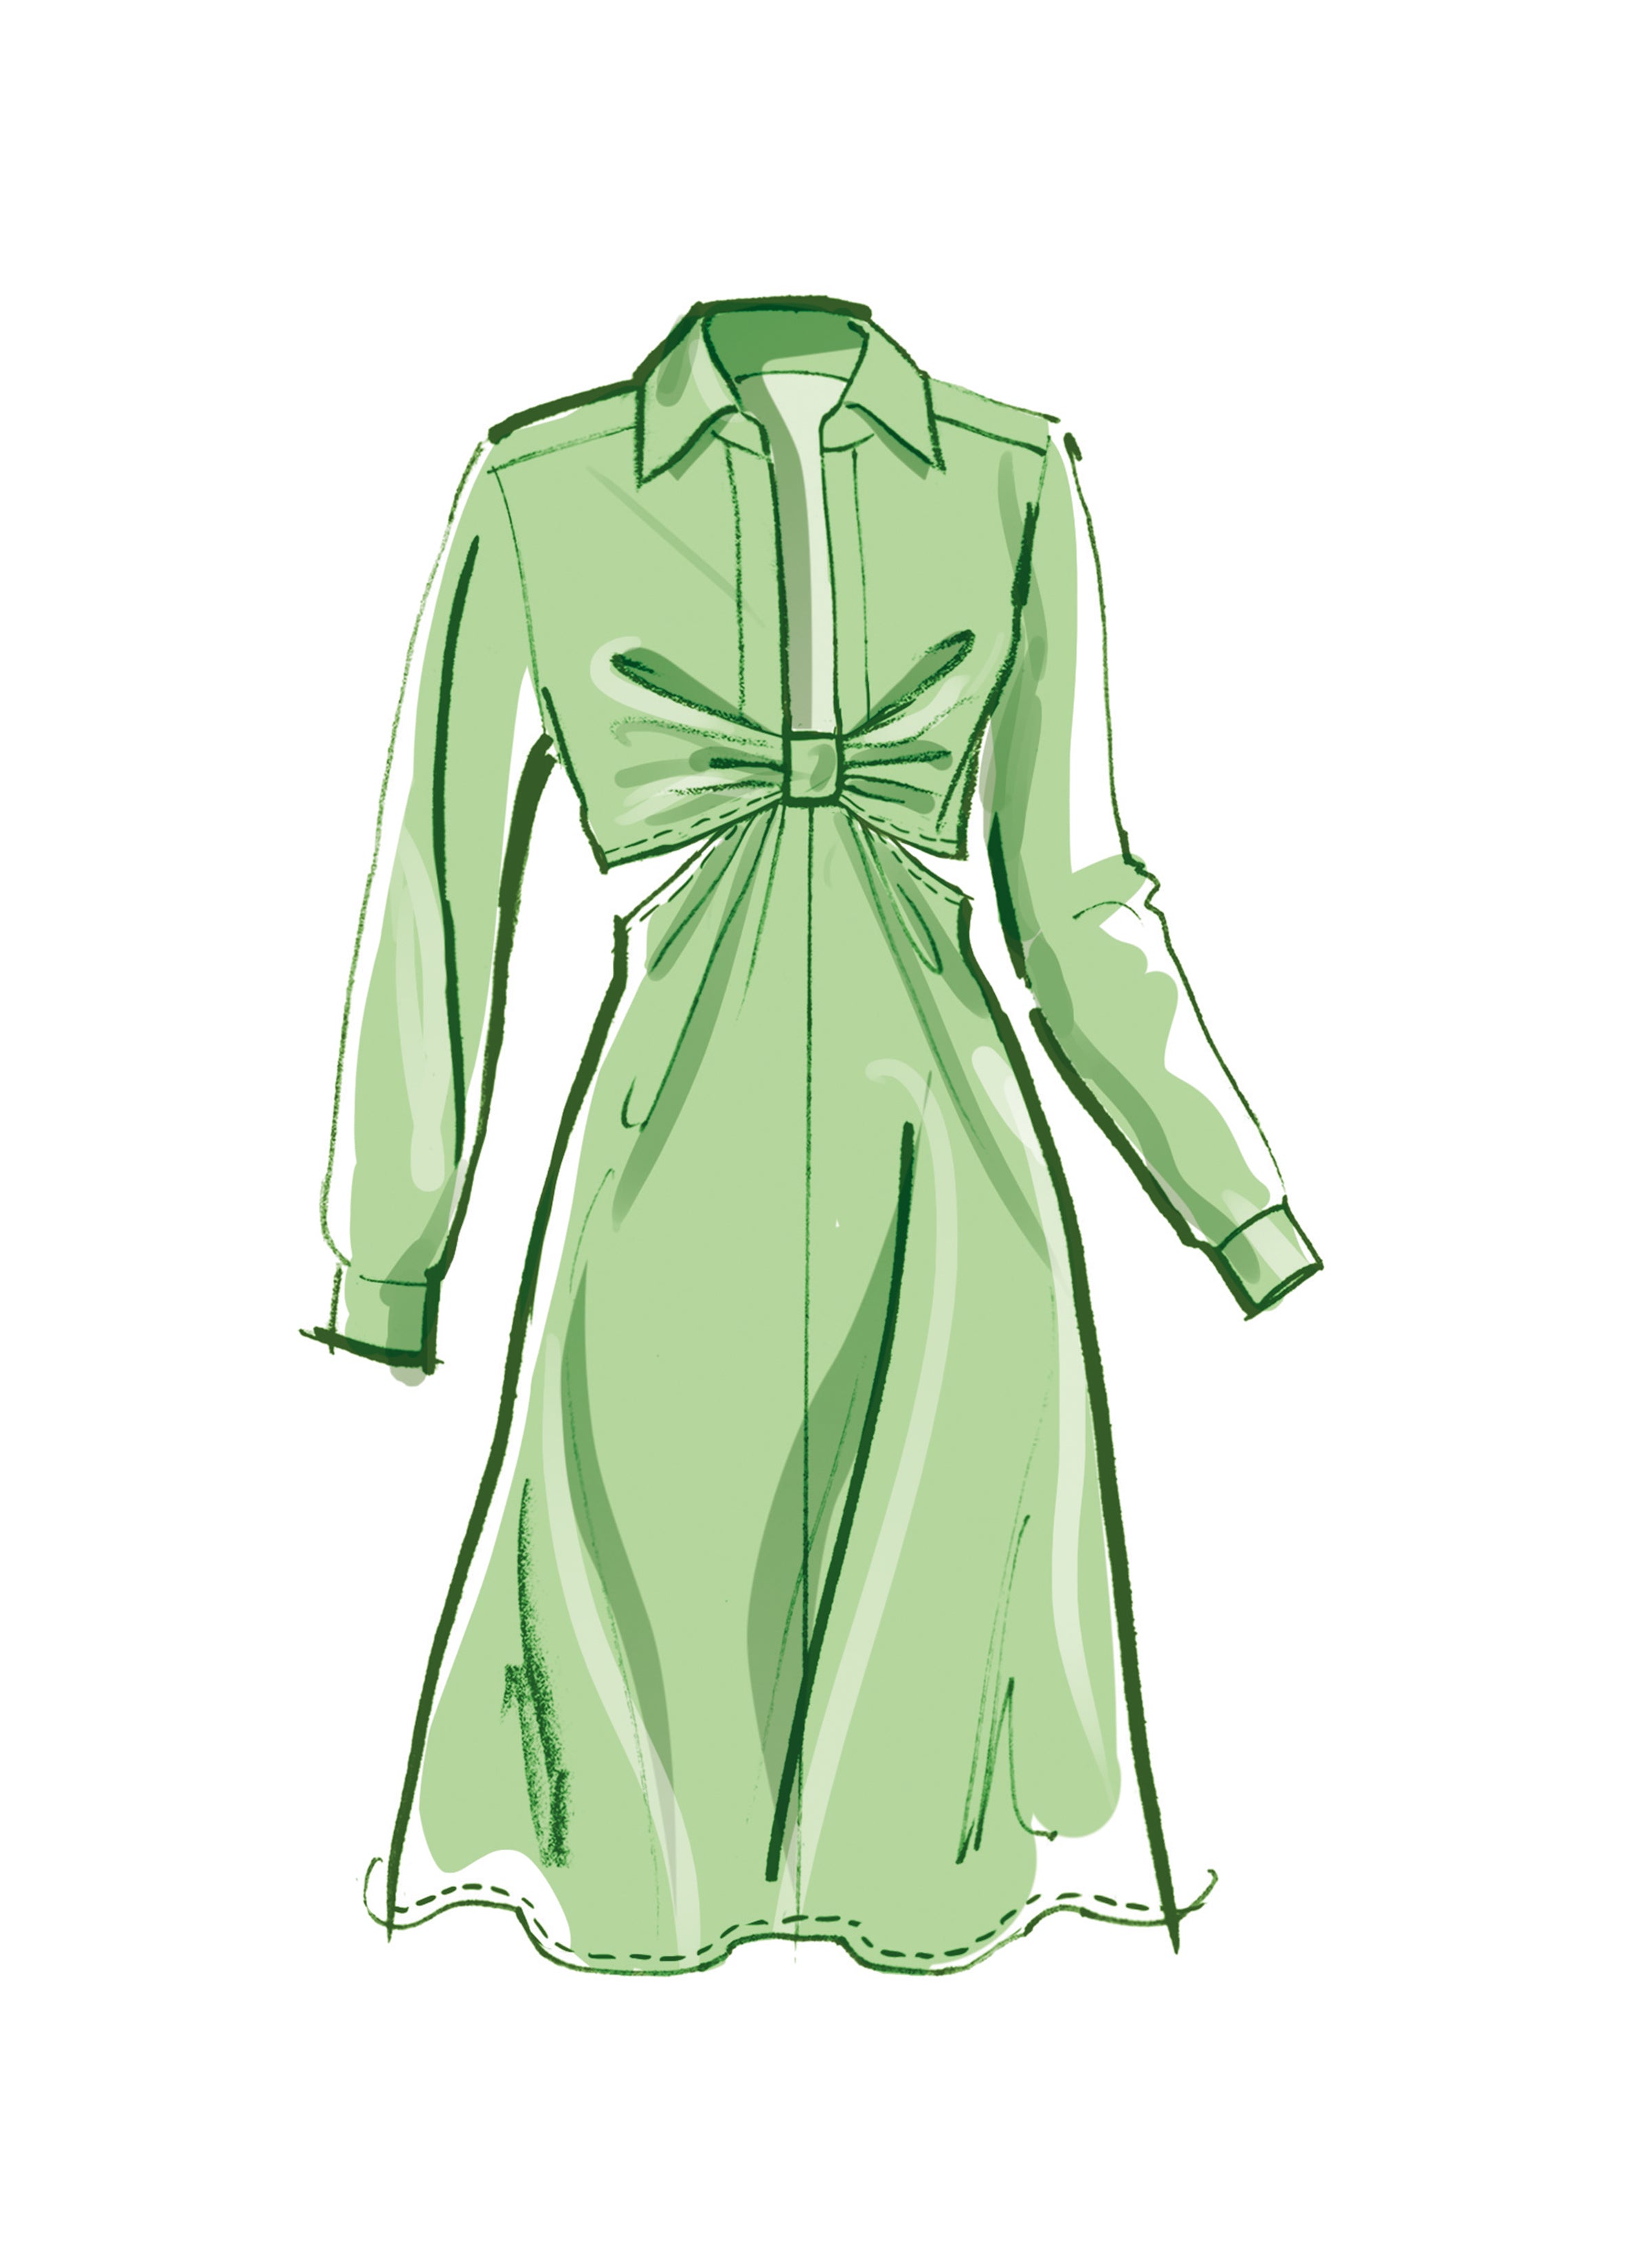 McCall's sewing pattern 8403 Knotted shirt dress from Jaycotts Sewing Supplies